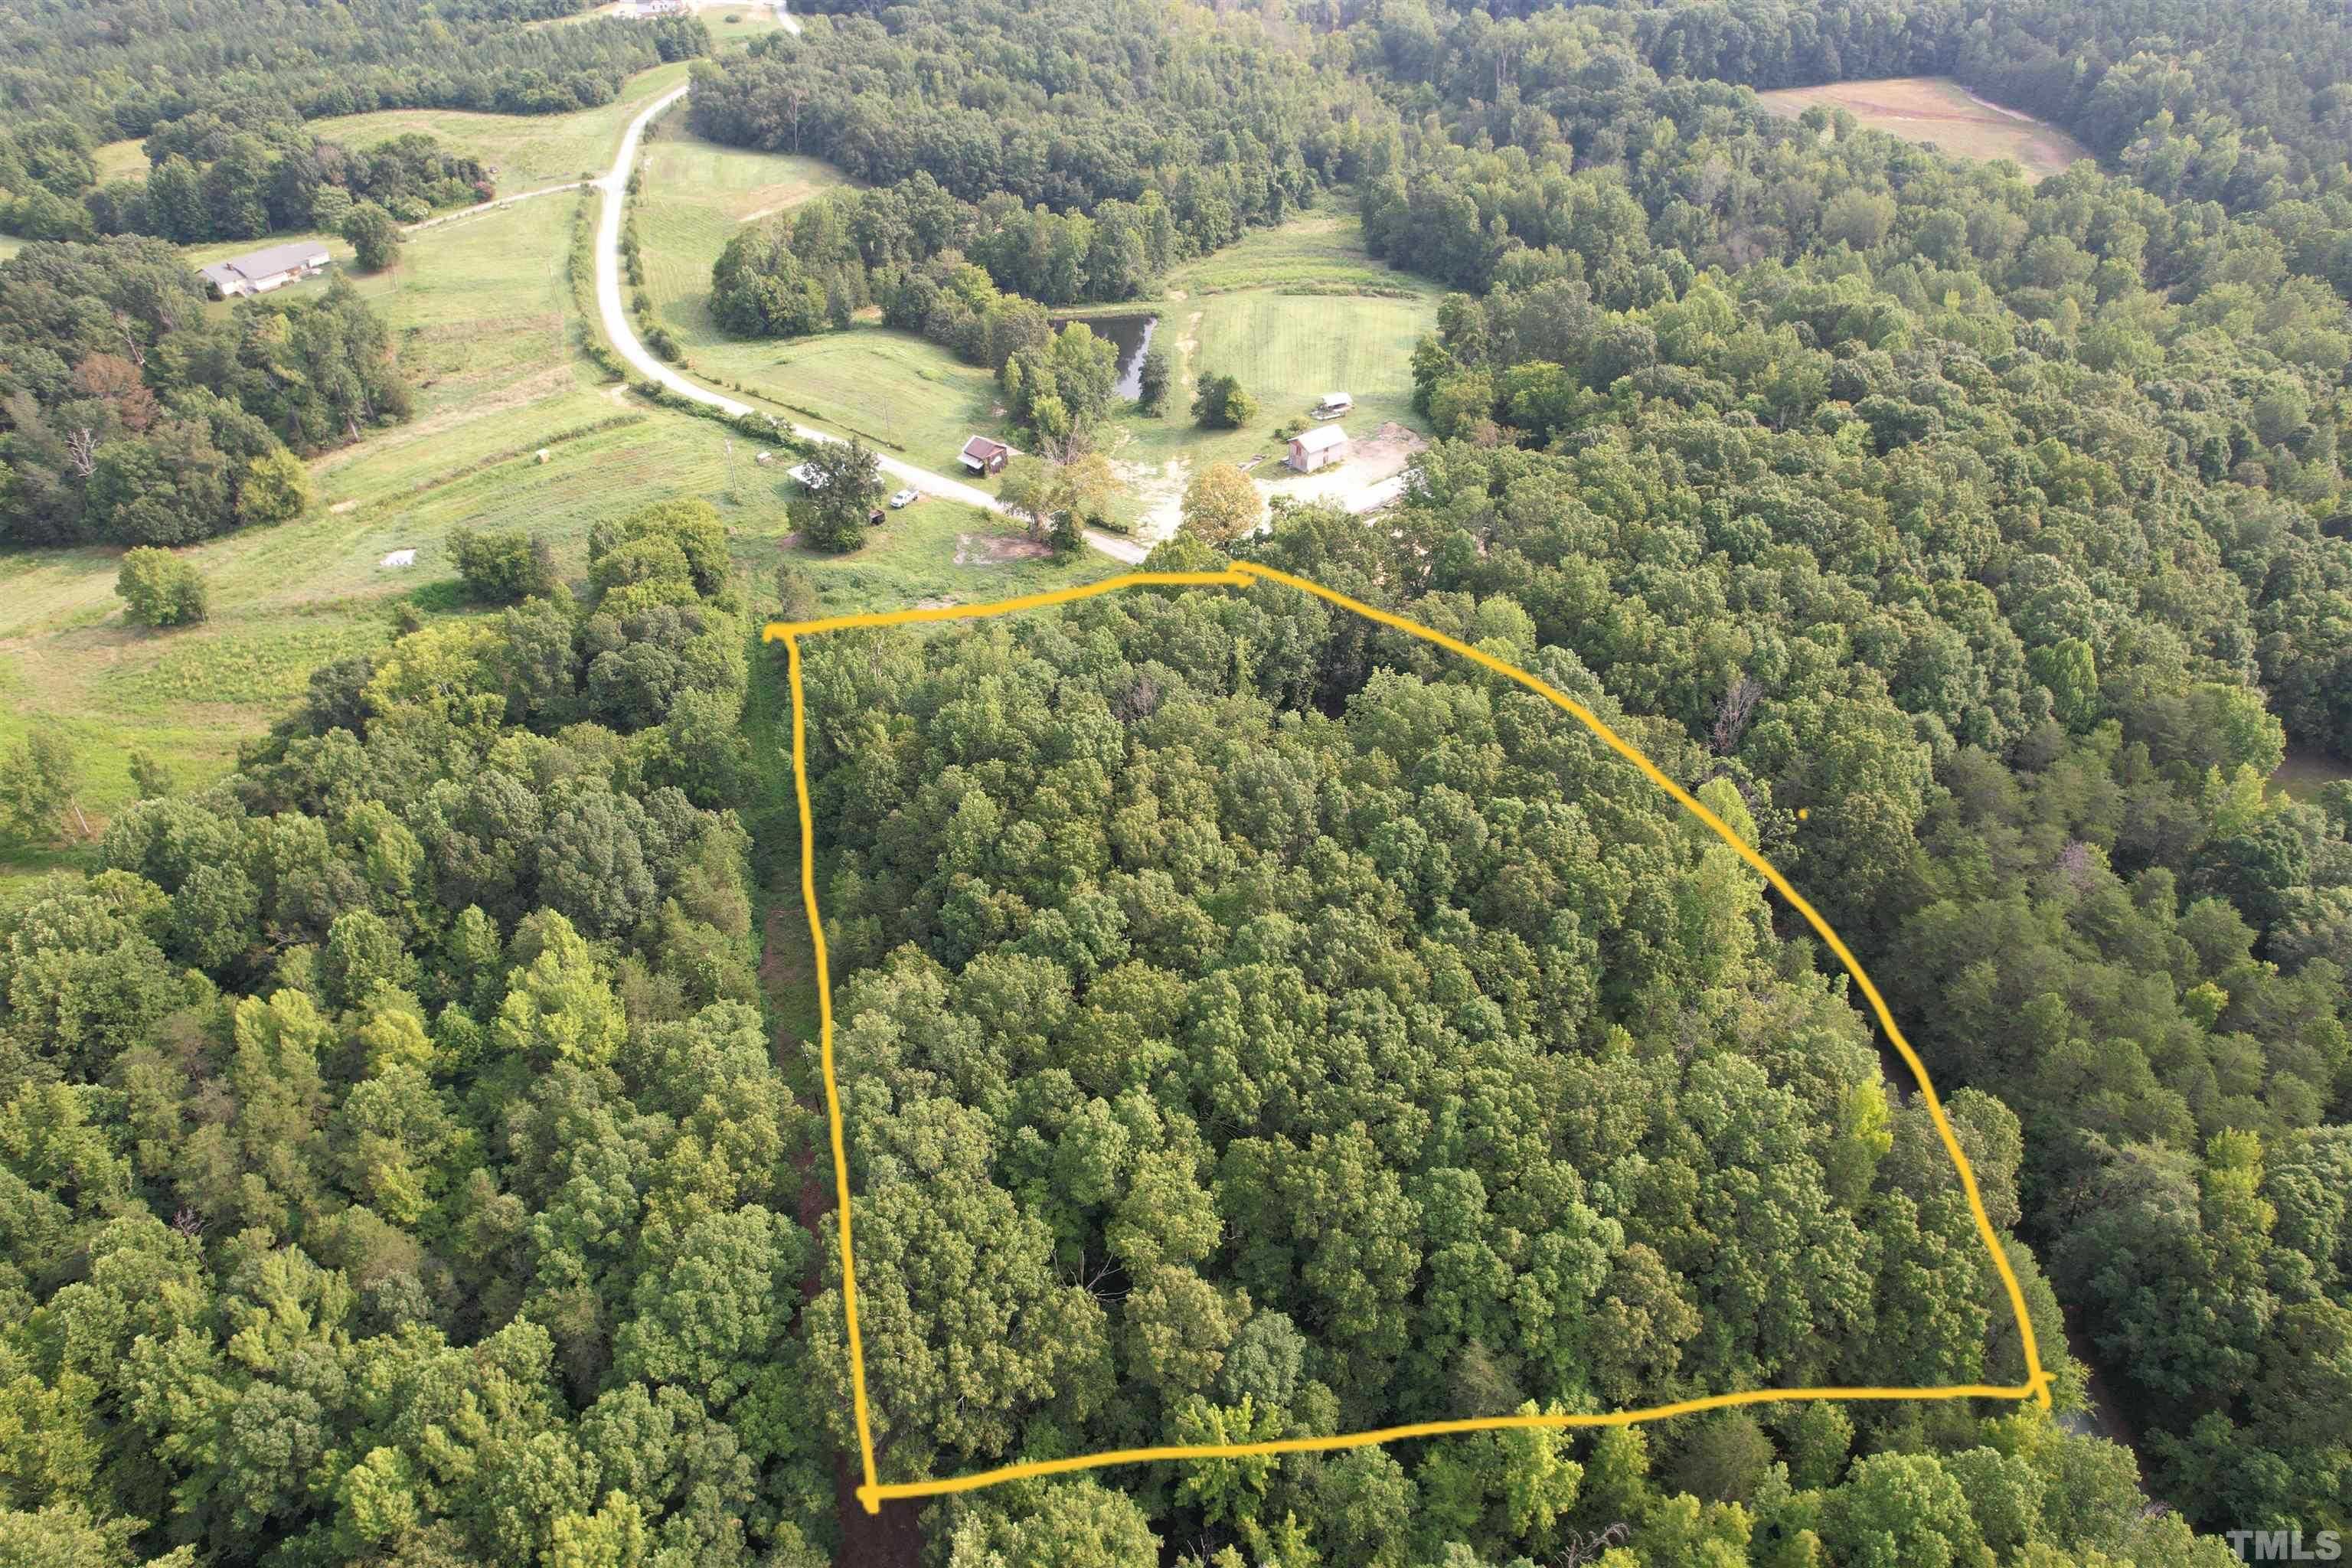 View Prospect Hill, NC 27314 land